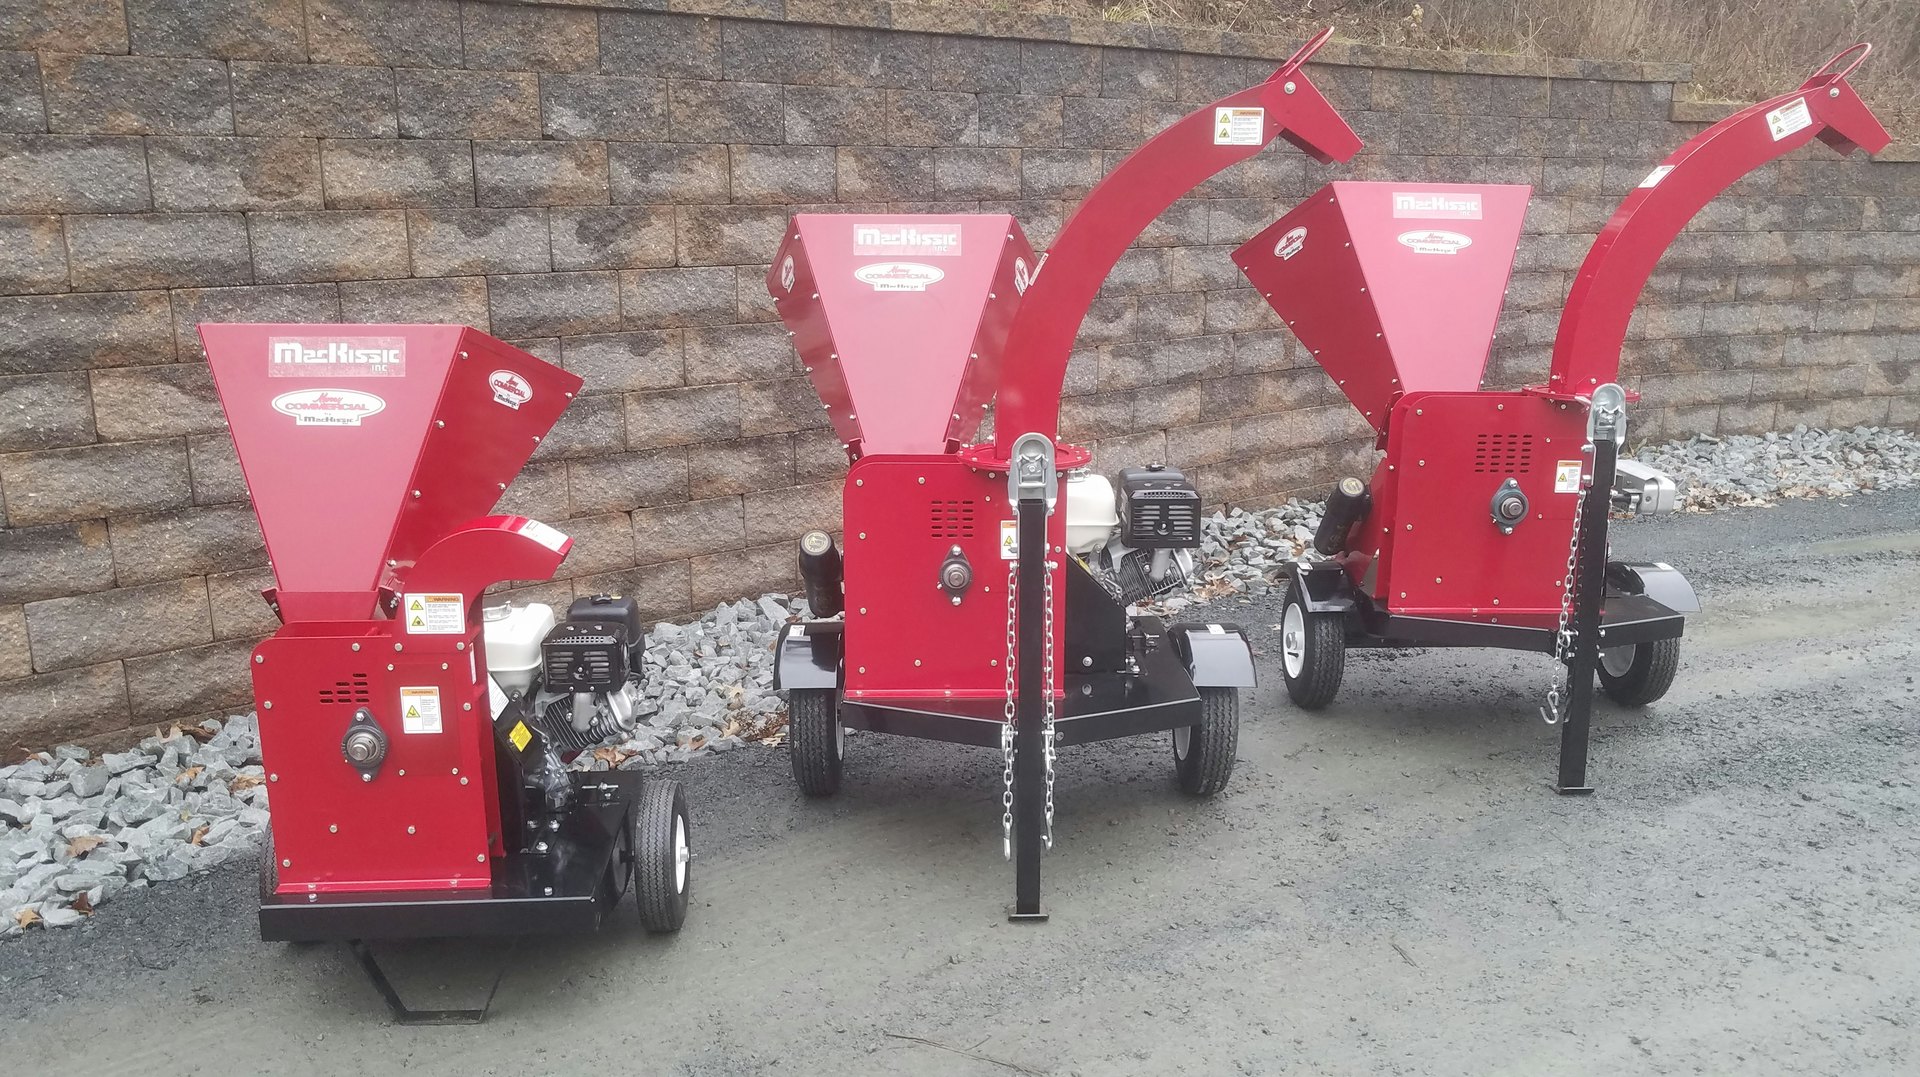 Merry Commercial Wood Chipper From Mackissic Inc For Construction Pros